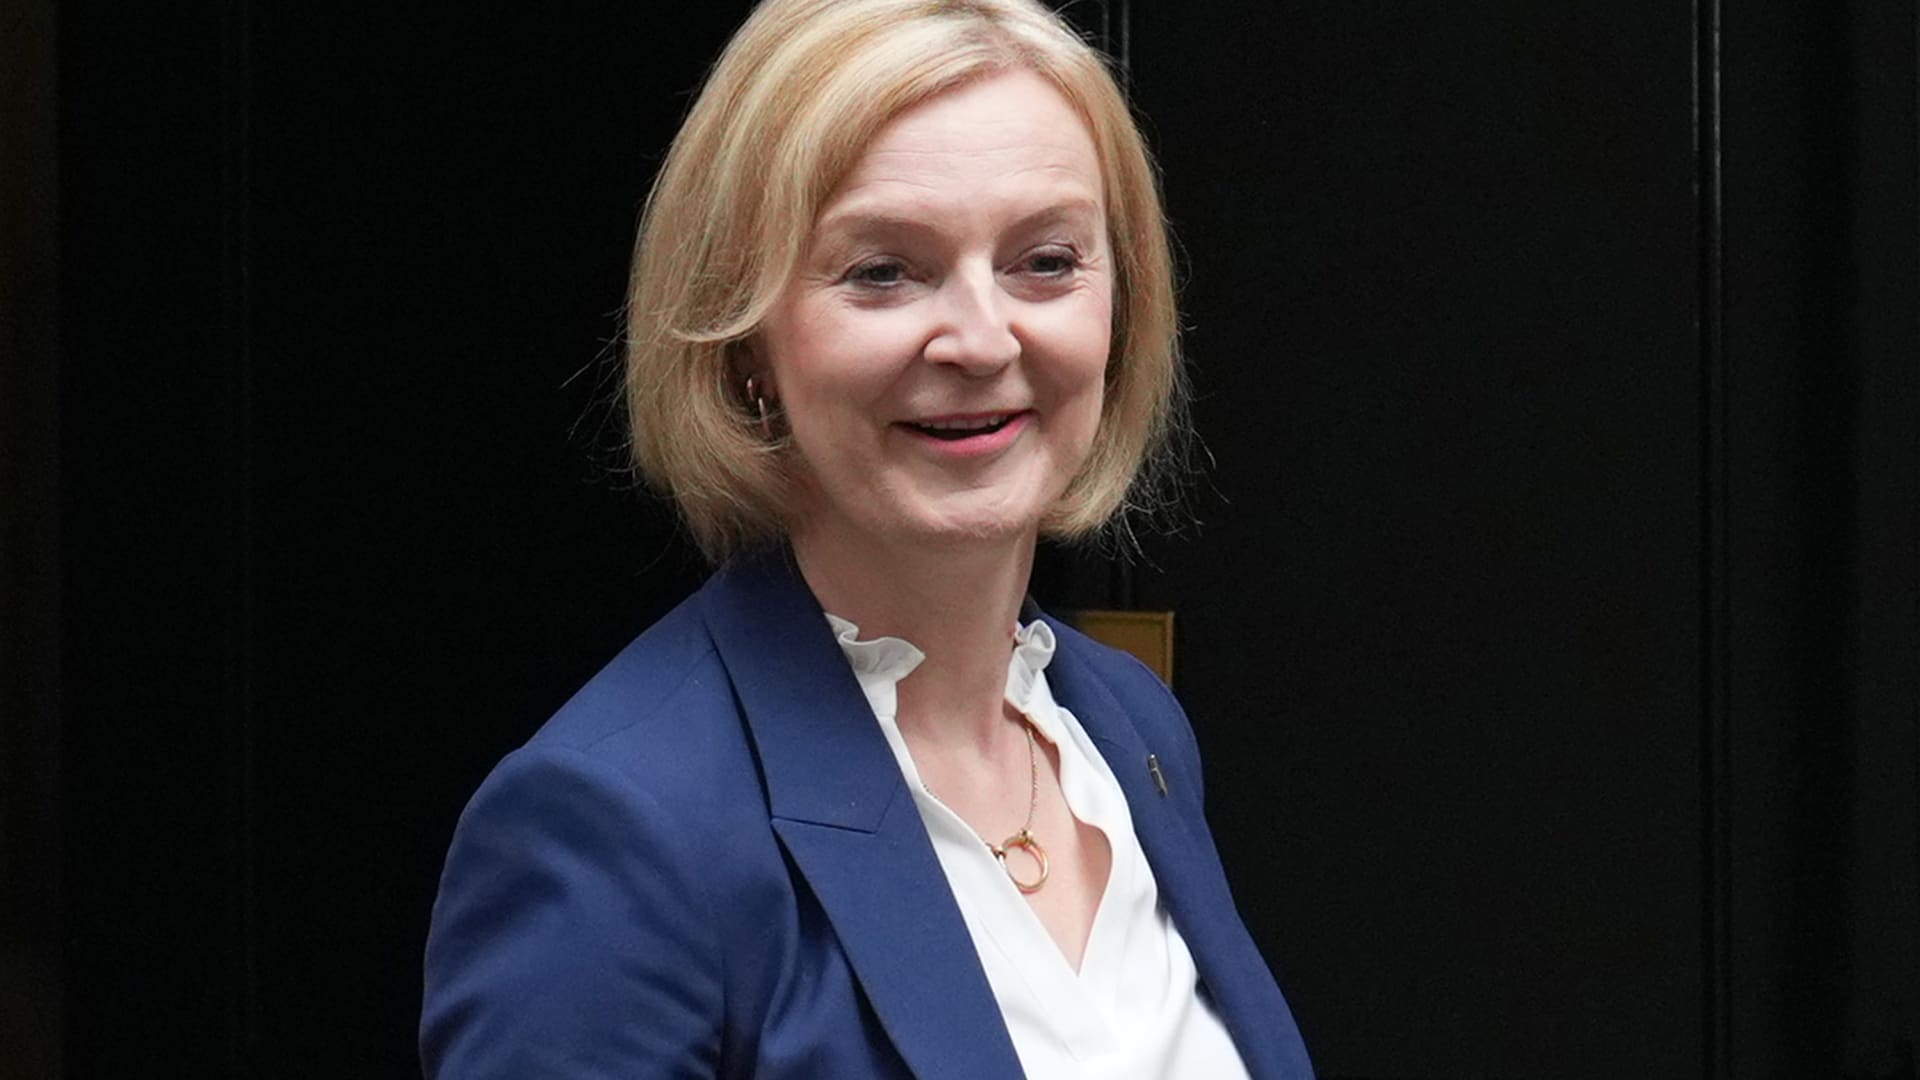 The U.K.'s newly elected prime minister Liz Truss is expected to announce a multibillion-pound stimulus package to help people with soaring energy prices.